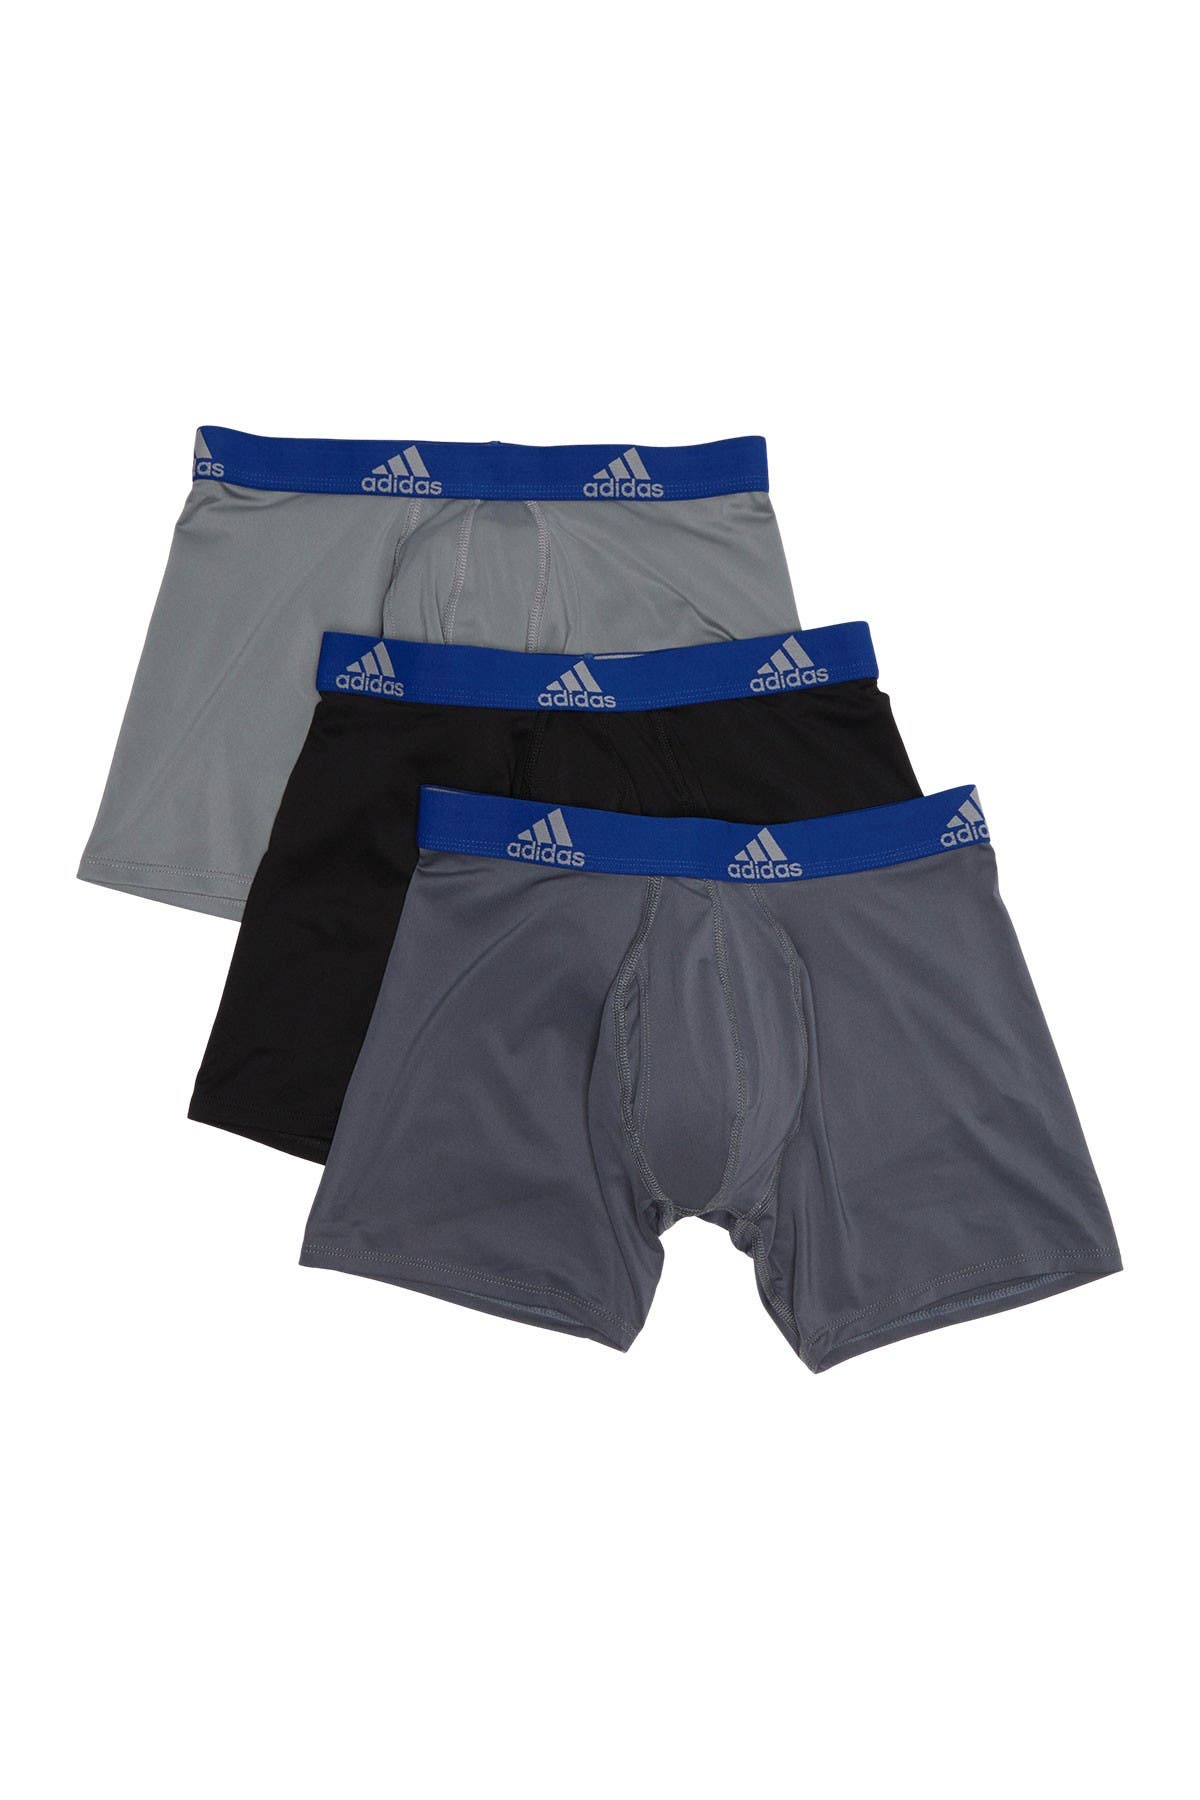 adidas performance the pack